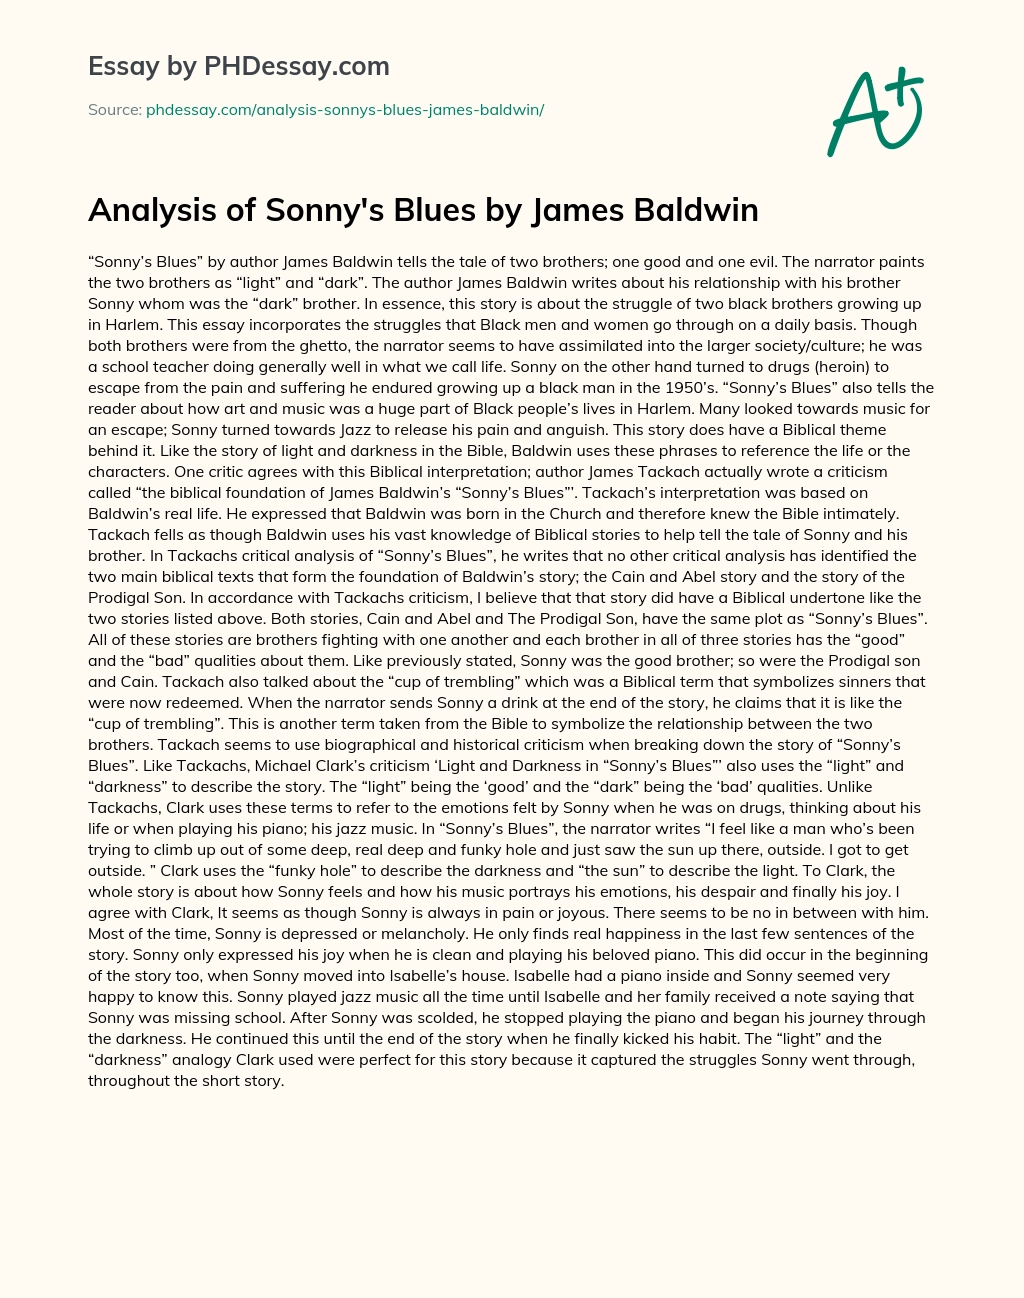 Analysis of Sonny’s Blues by James Baldwin essay